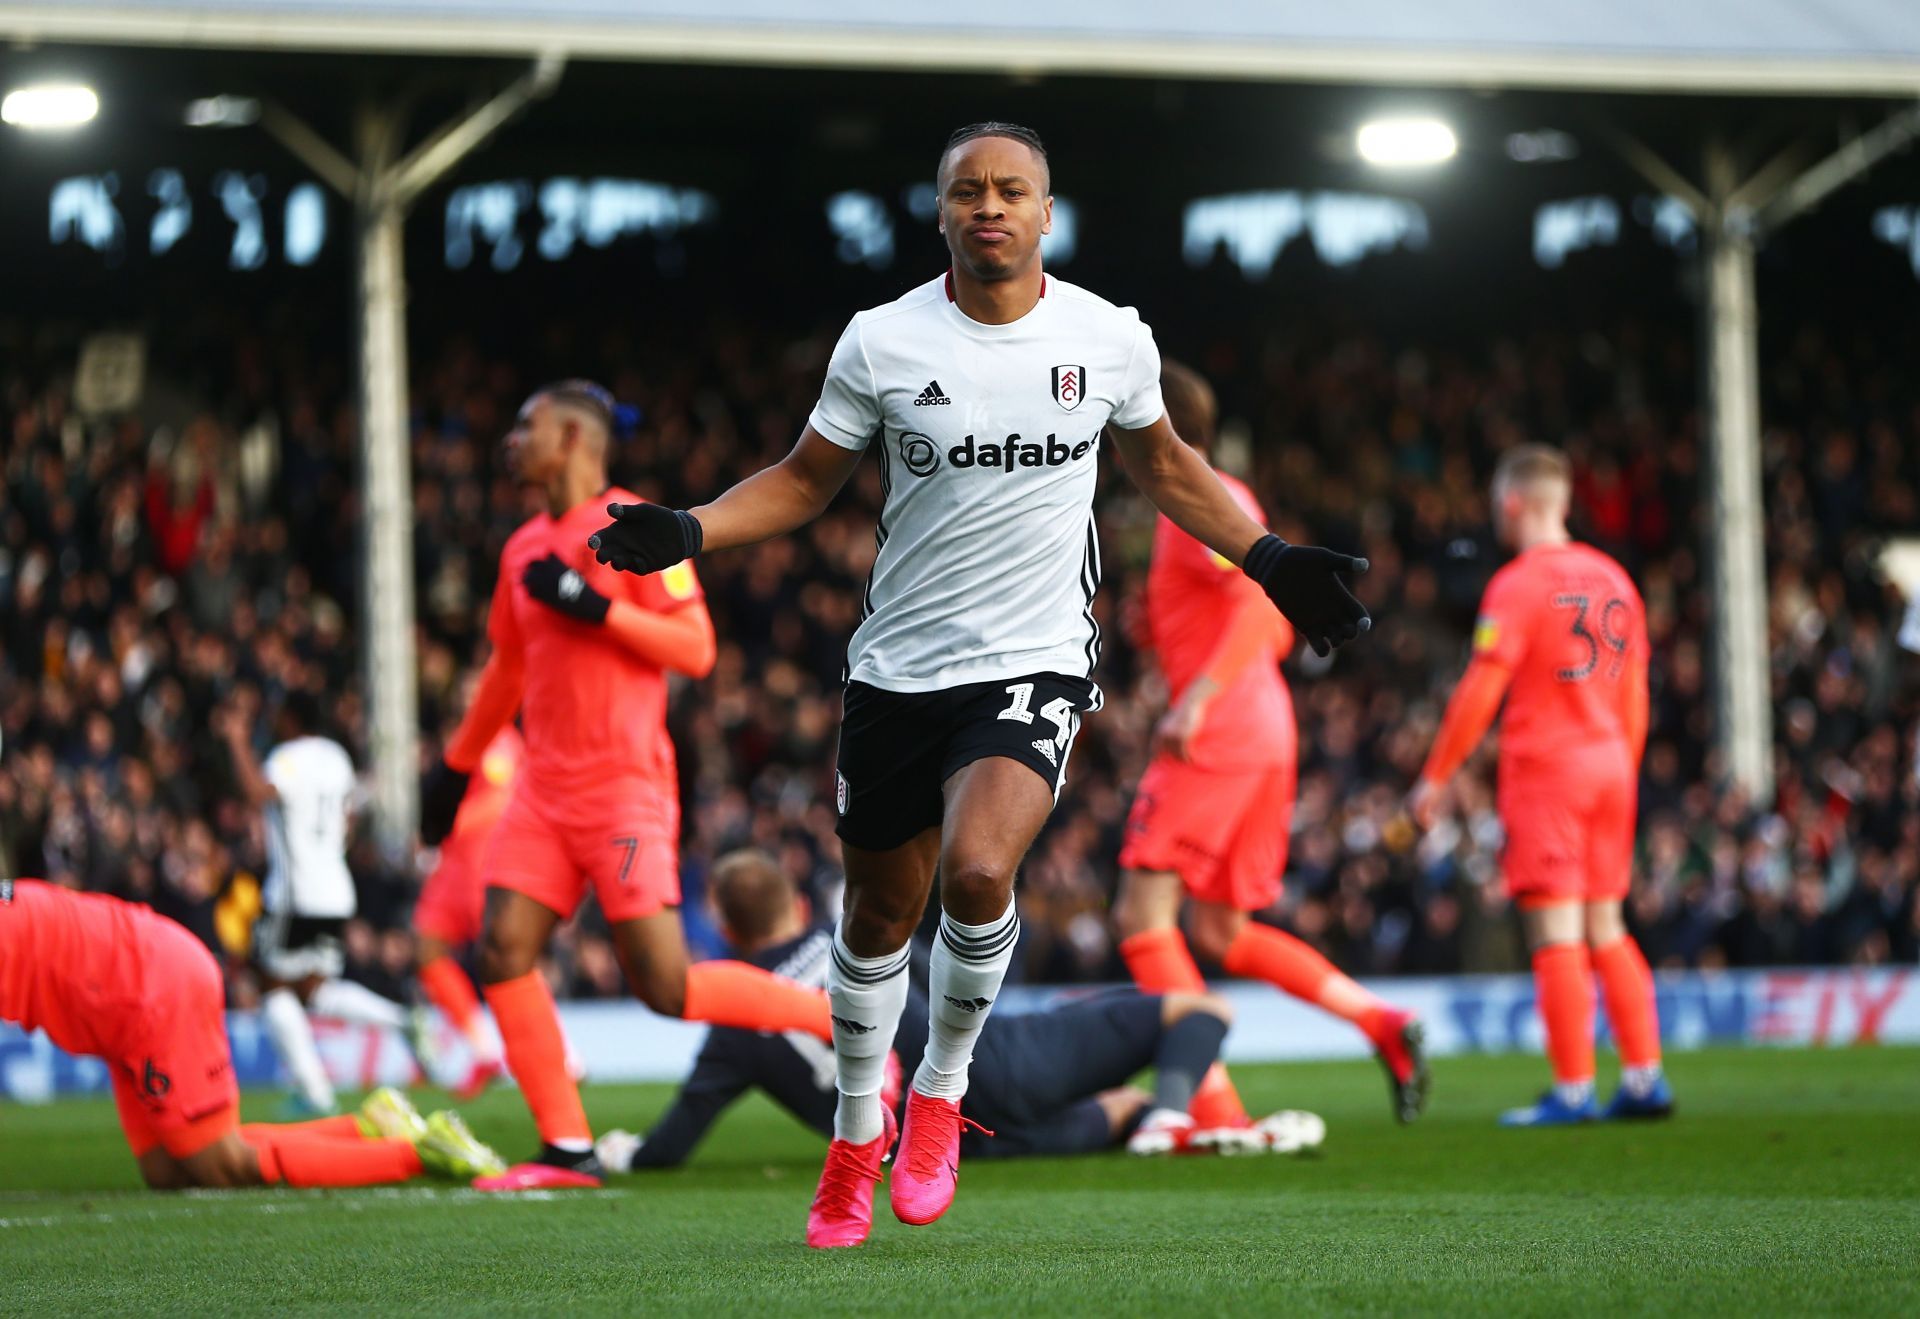 Fulham play host to Huddersfield Town on Saturday